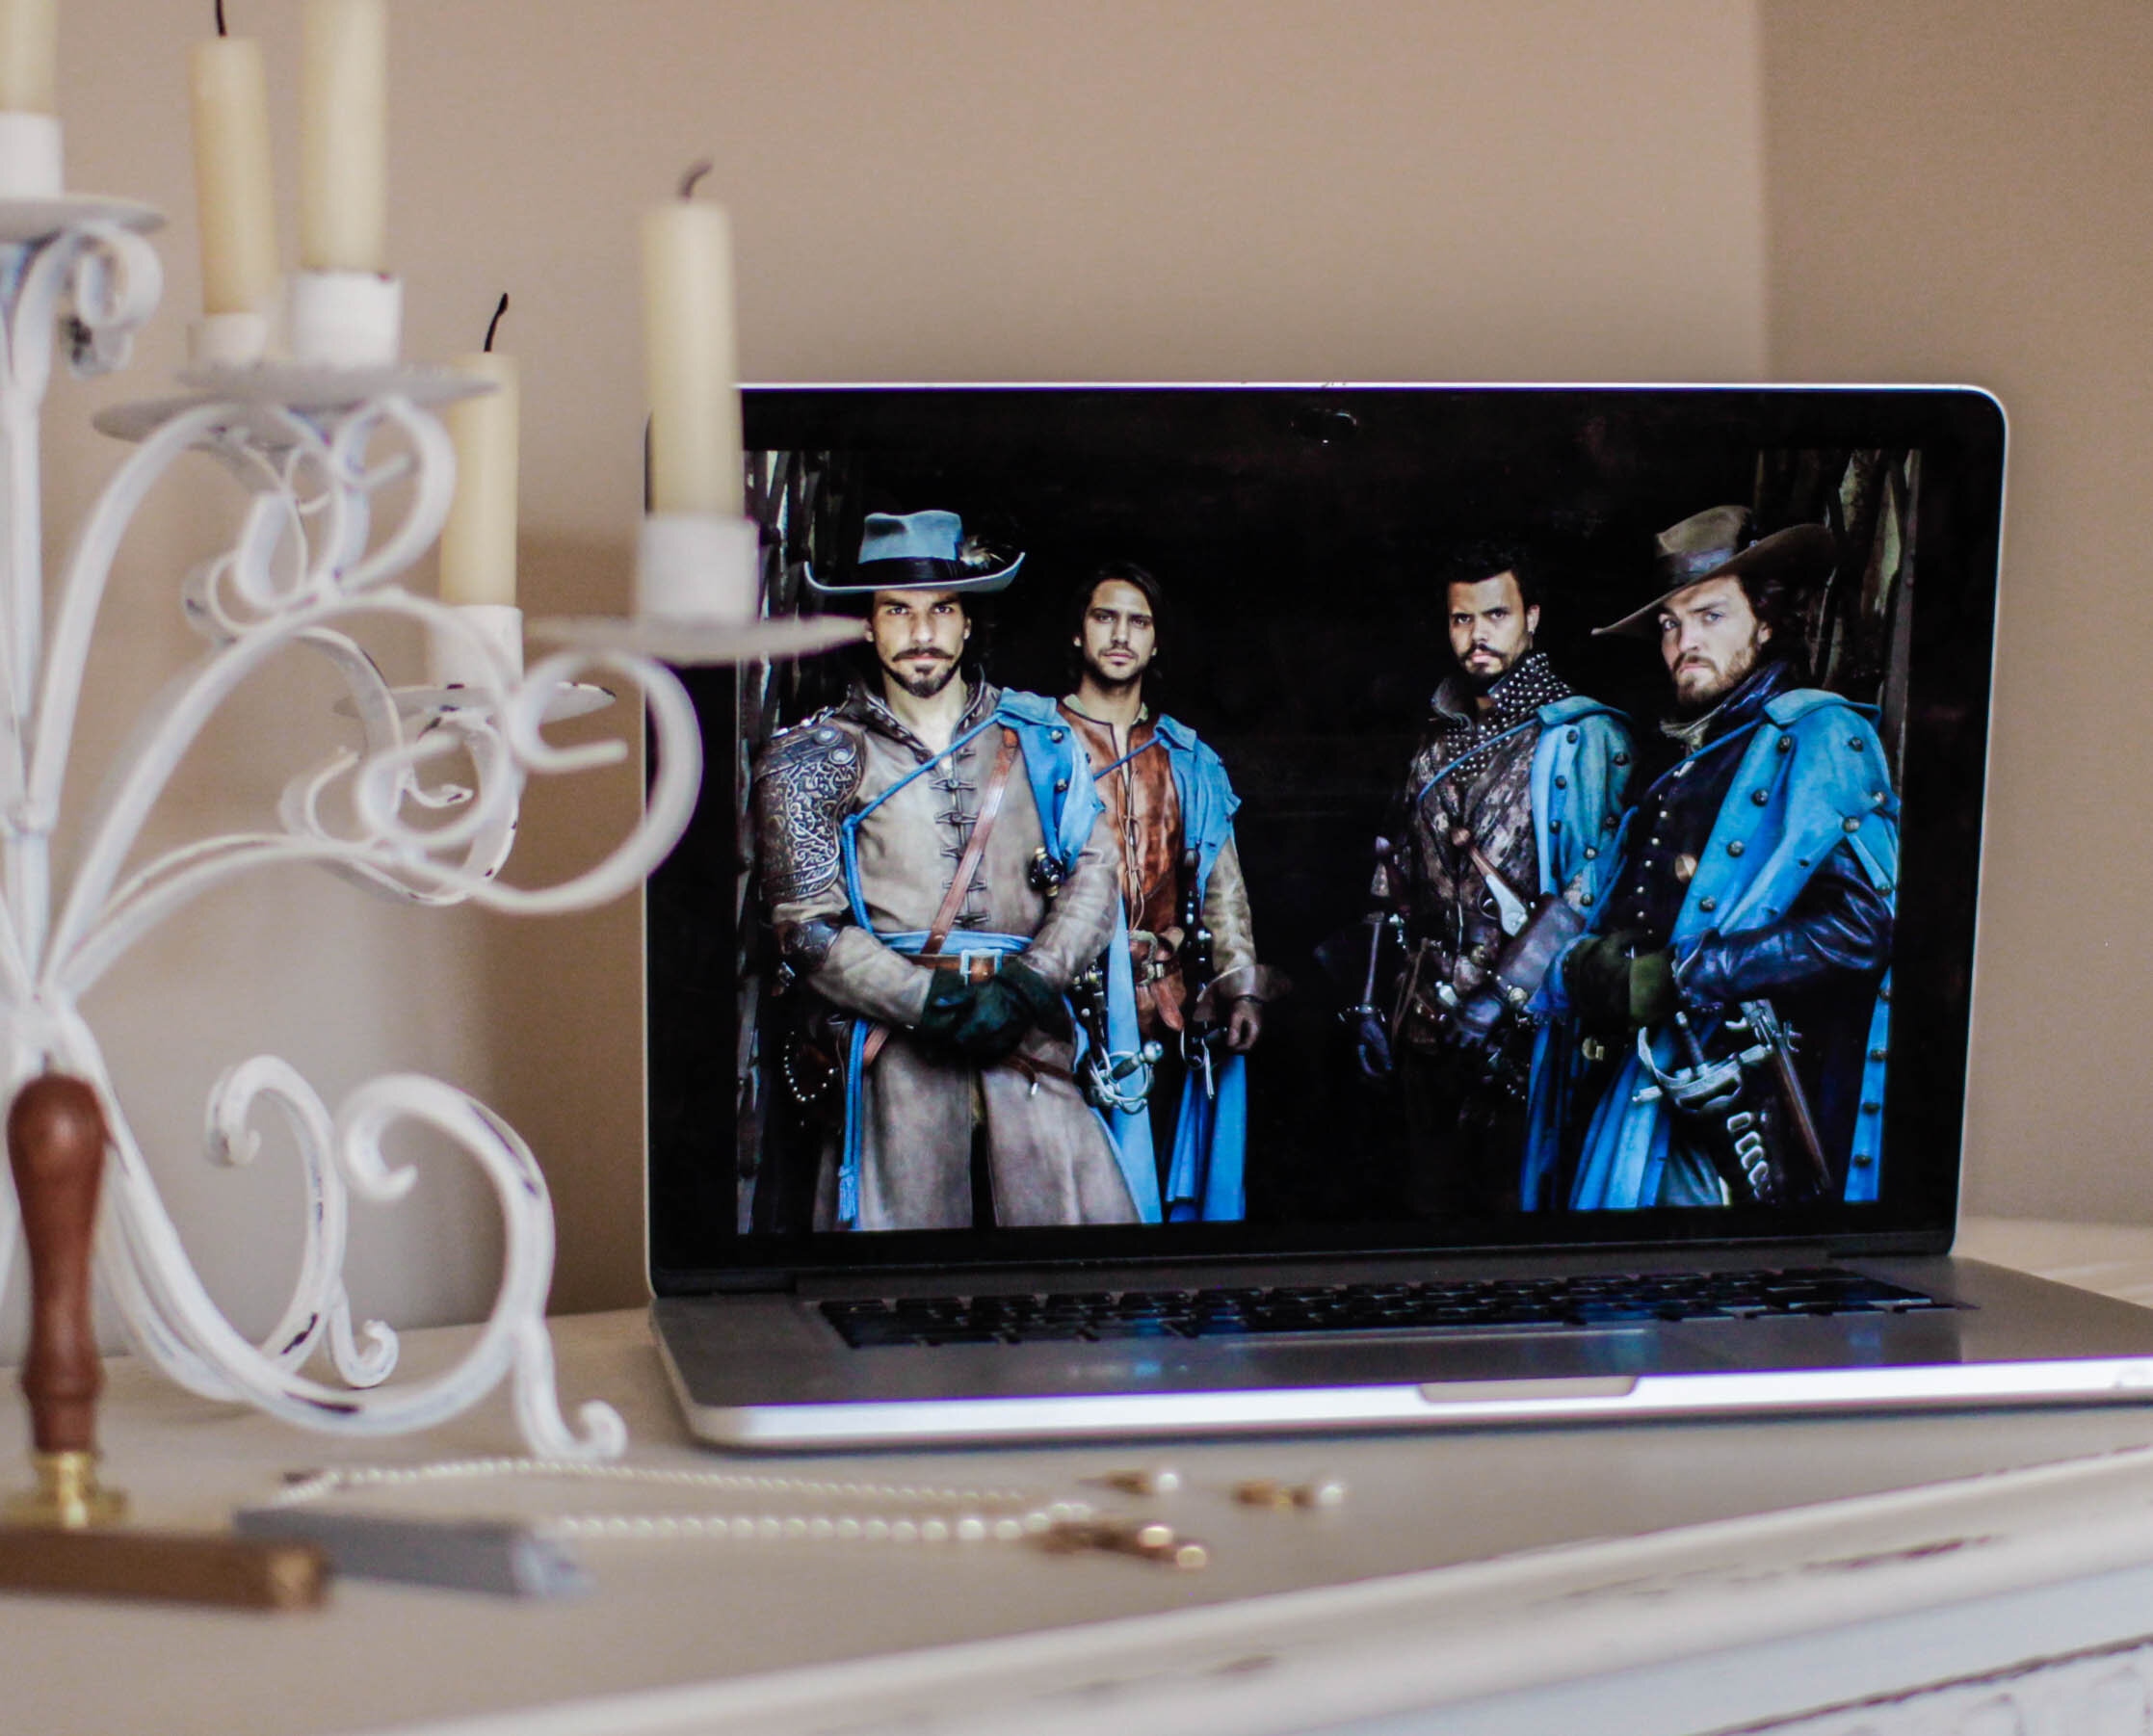 READ: Why “The Musketeers” Is The Greatest Show To Exist